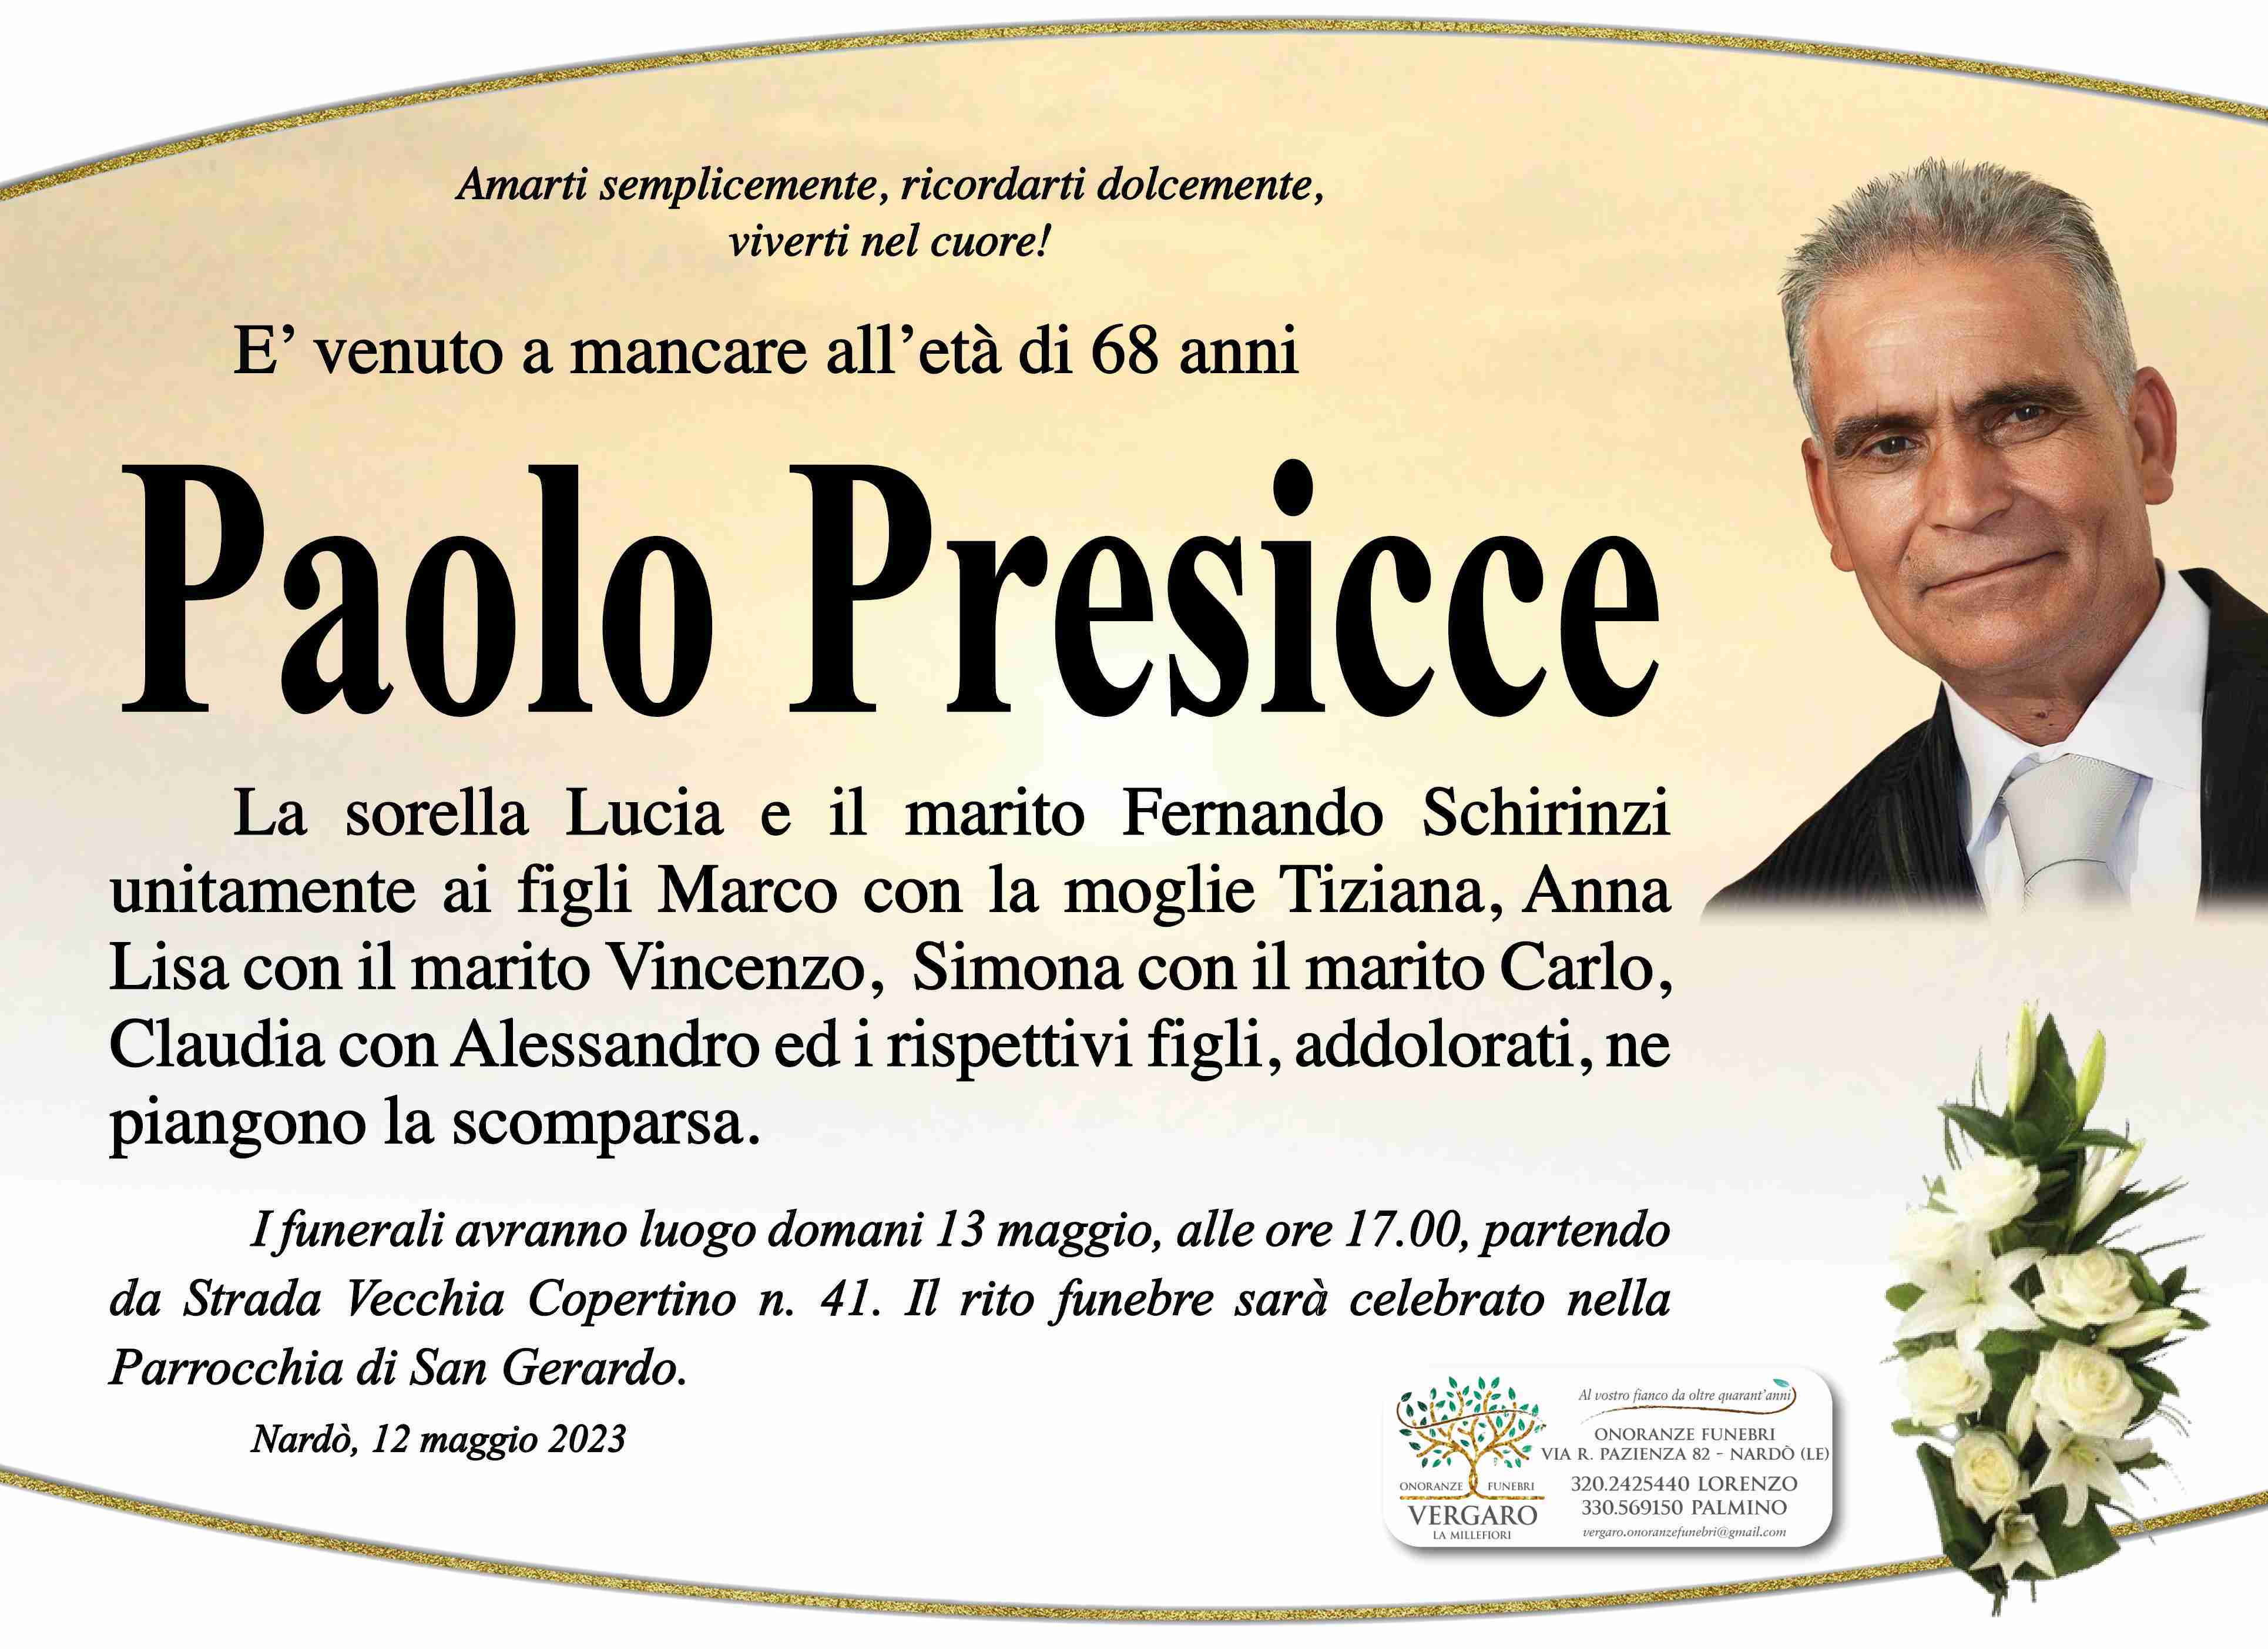 Paolo Presicce